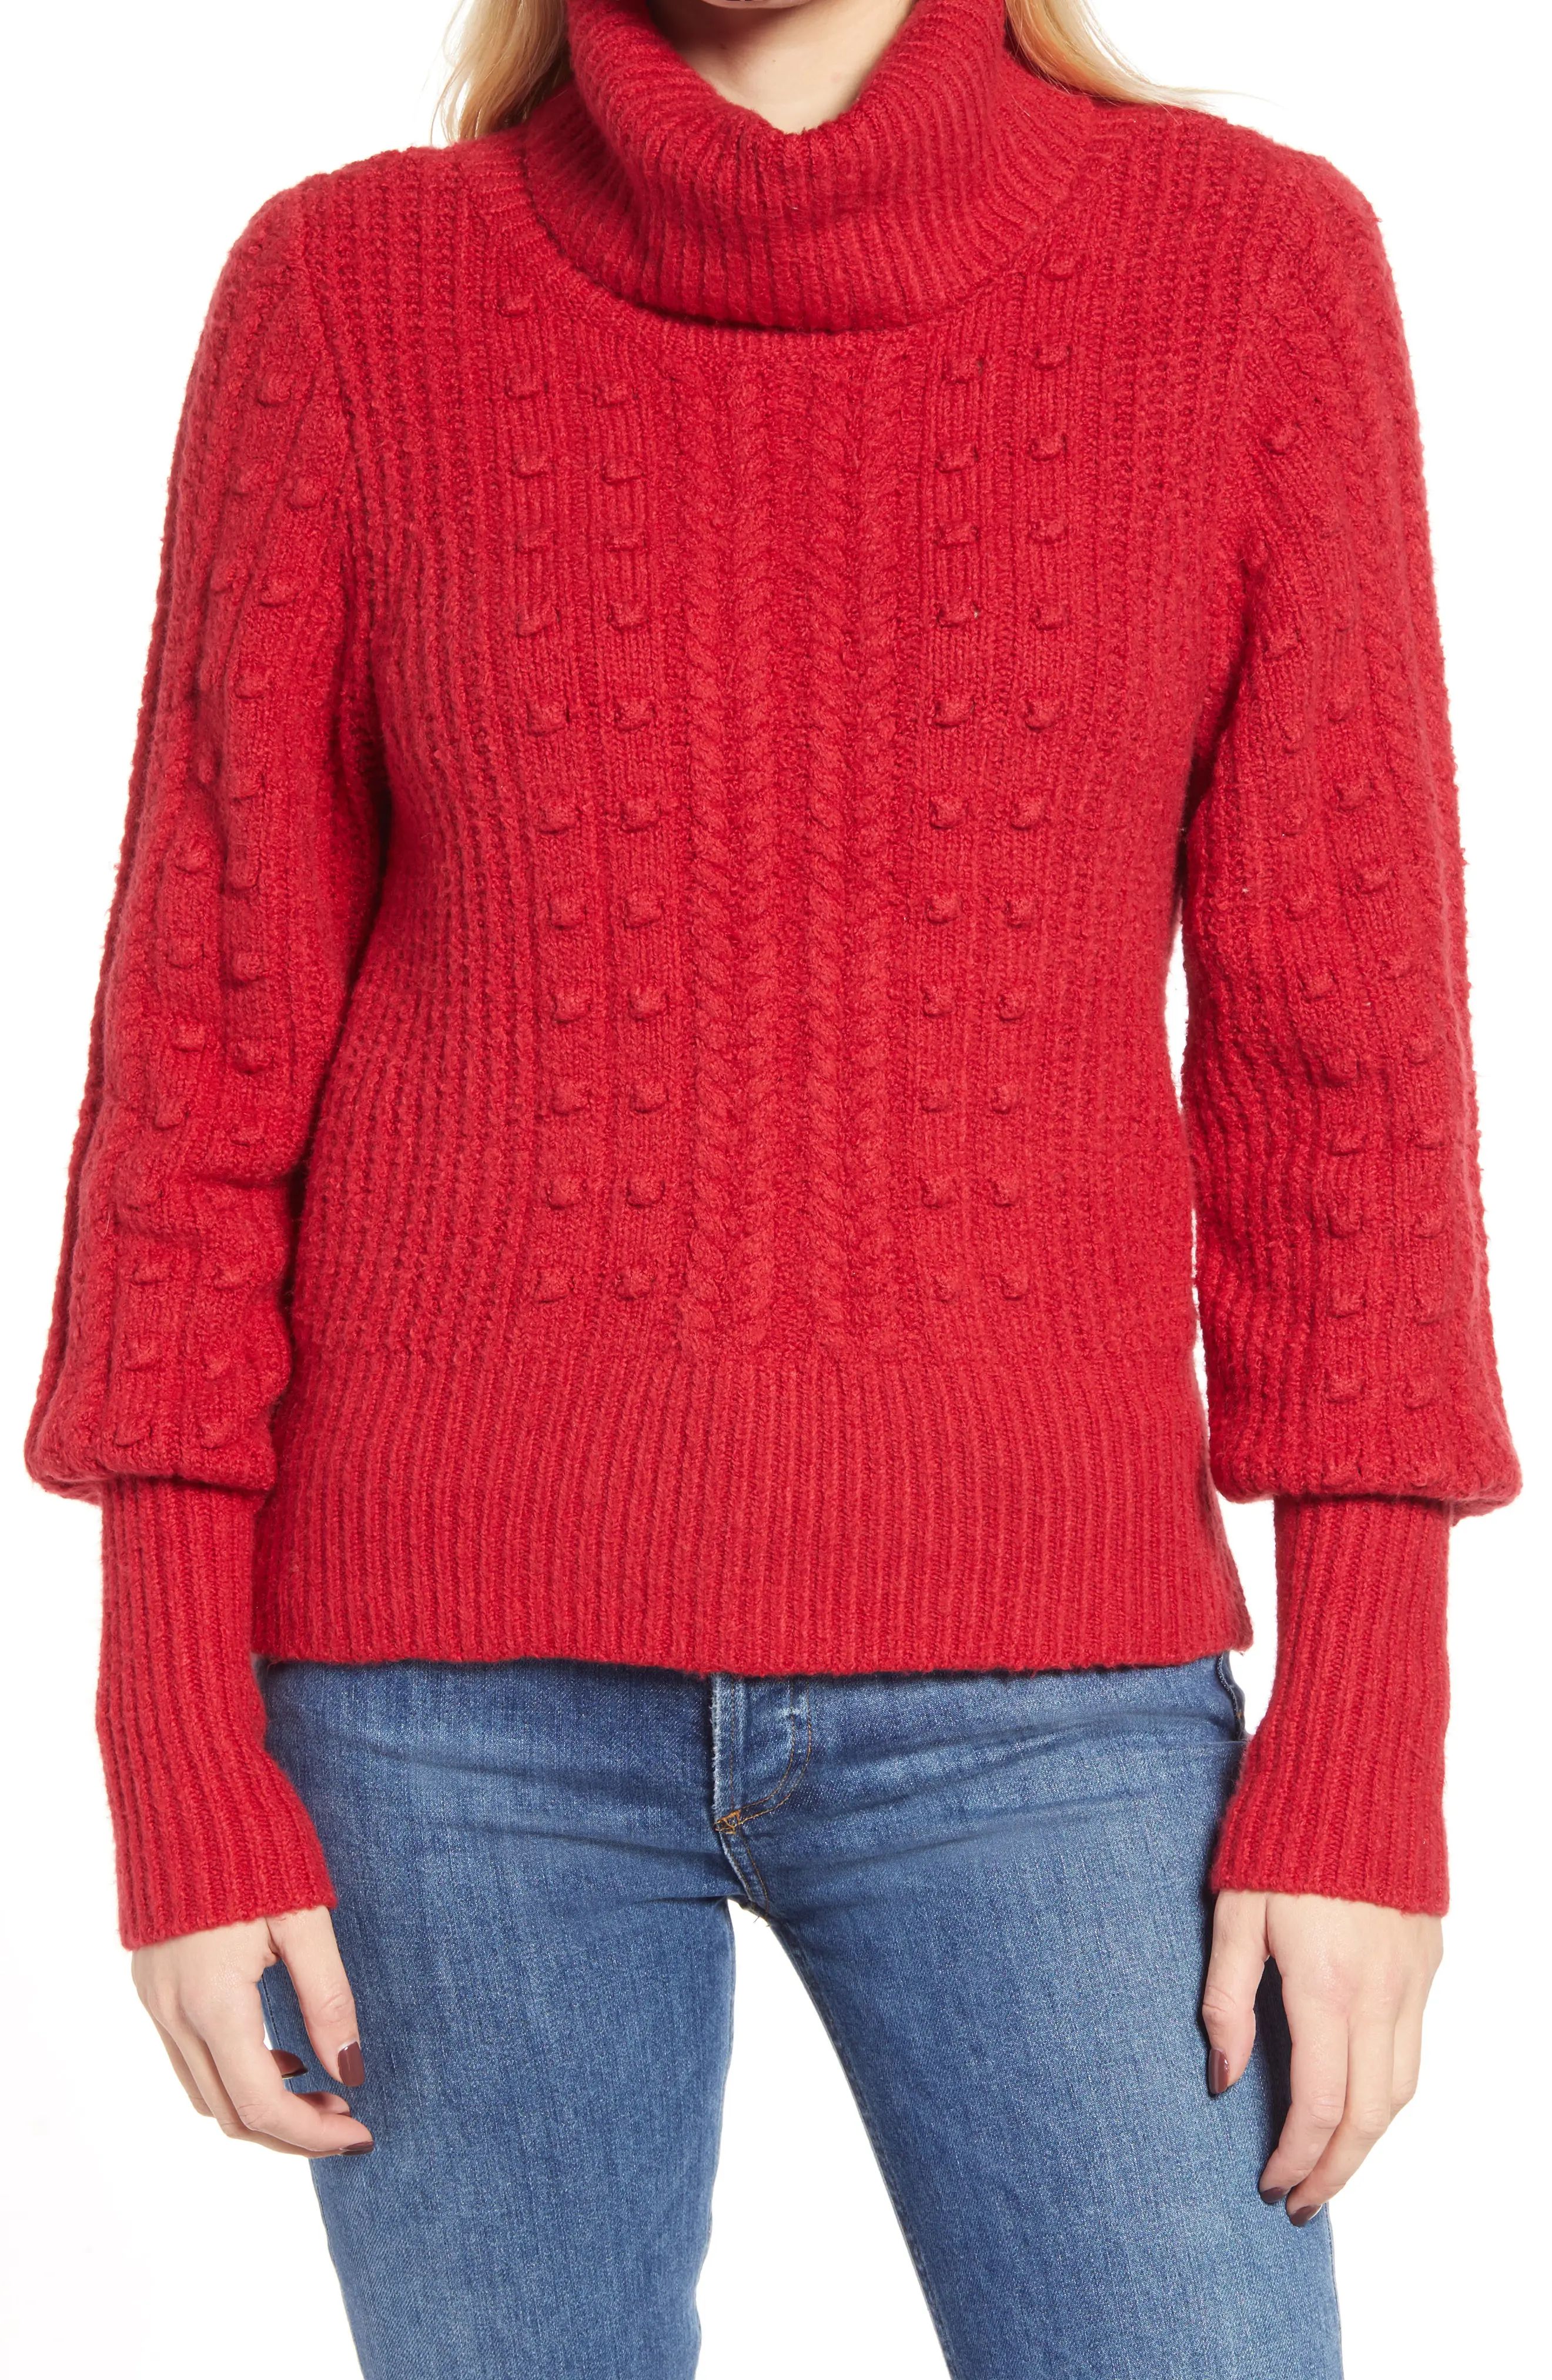 Women's Rachel Parcell Cable & Bobble Turtleneck Sweater, Size X-Small - Red (Nordstrom Exclusive) | Nordstrom